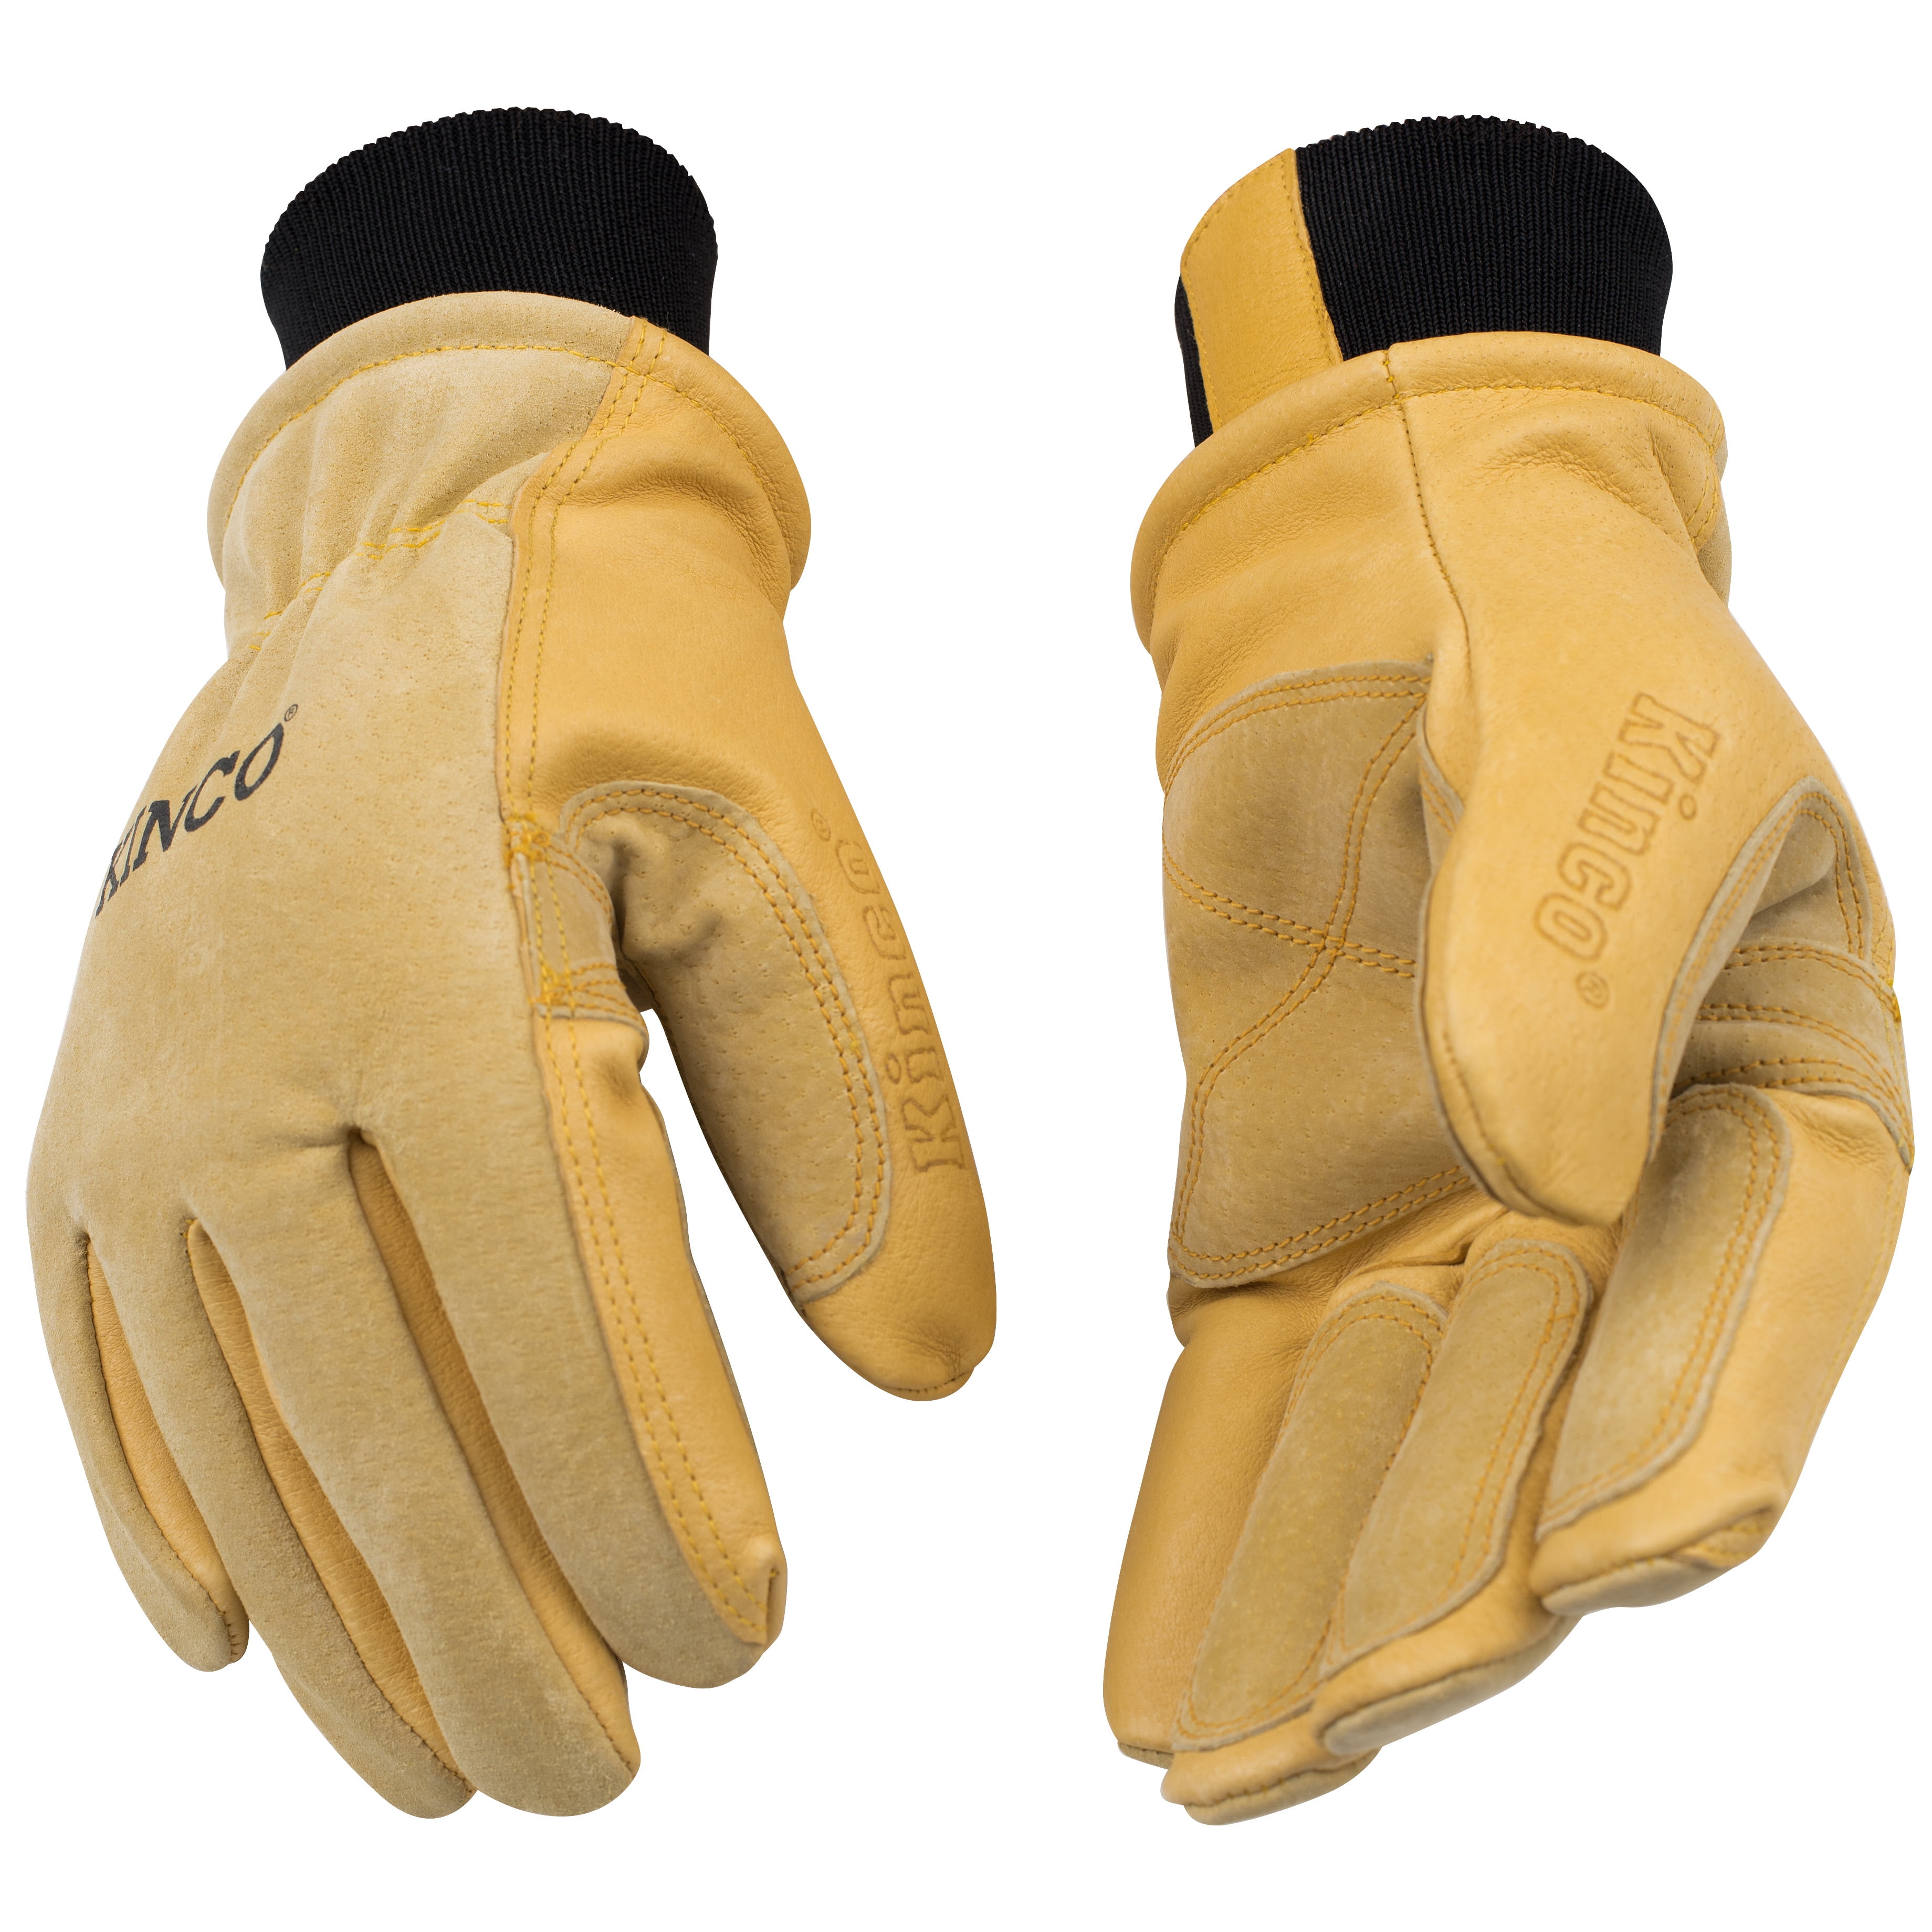 Lined Gloves Deerskin Thermal Insulated Kinco 101hk X-large for sale online 